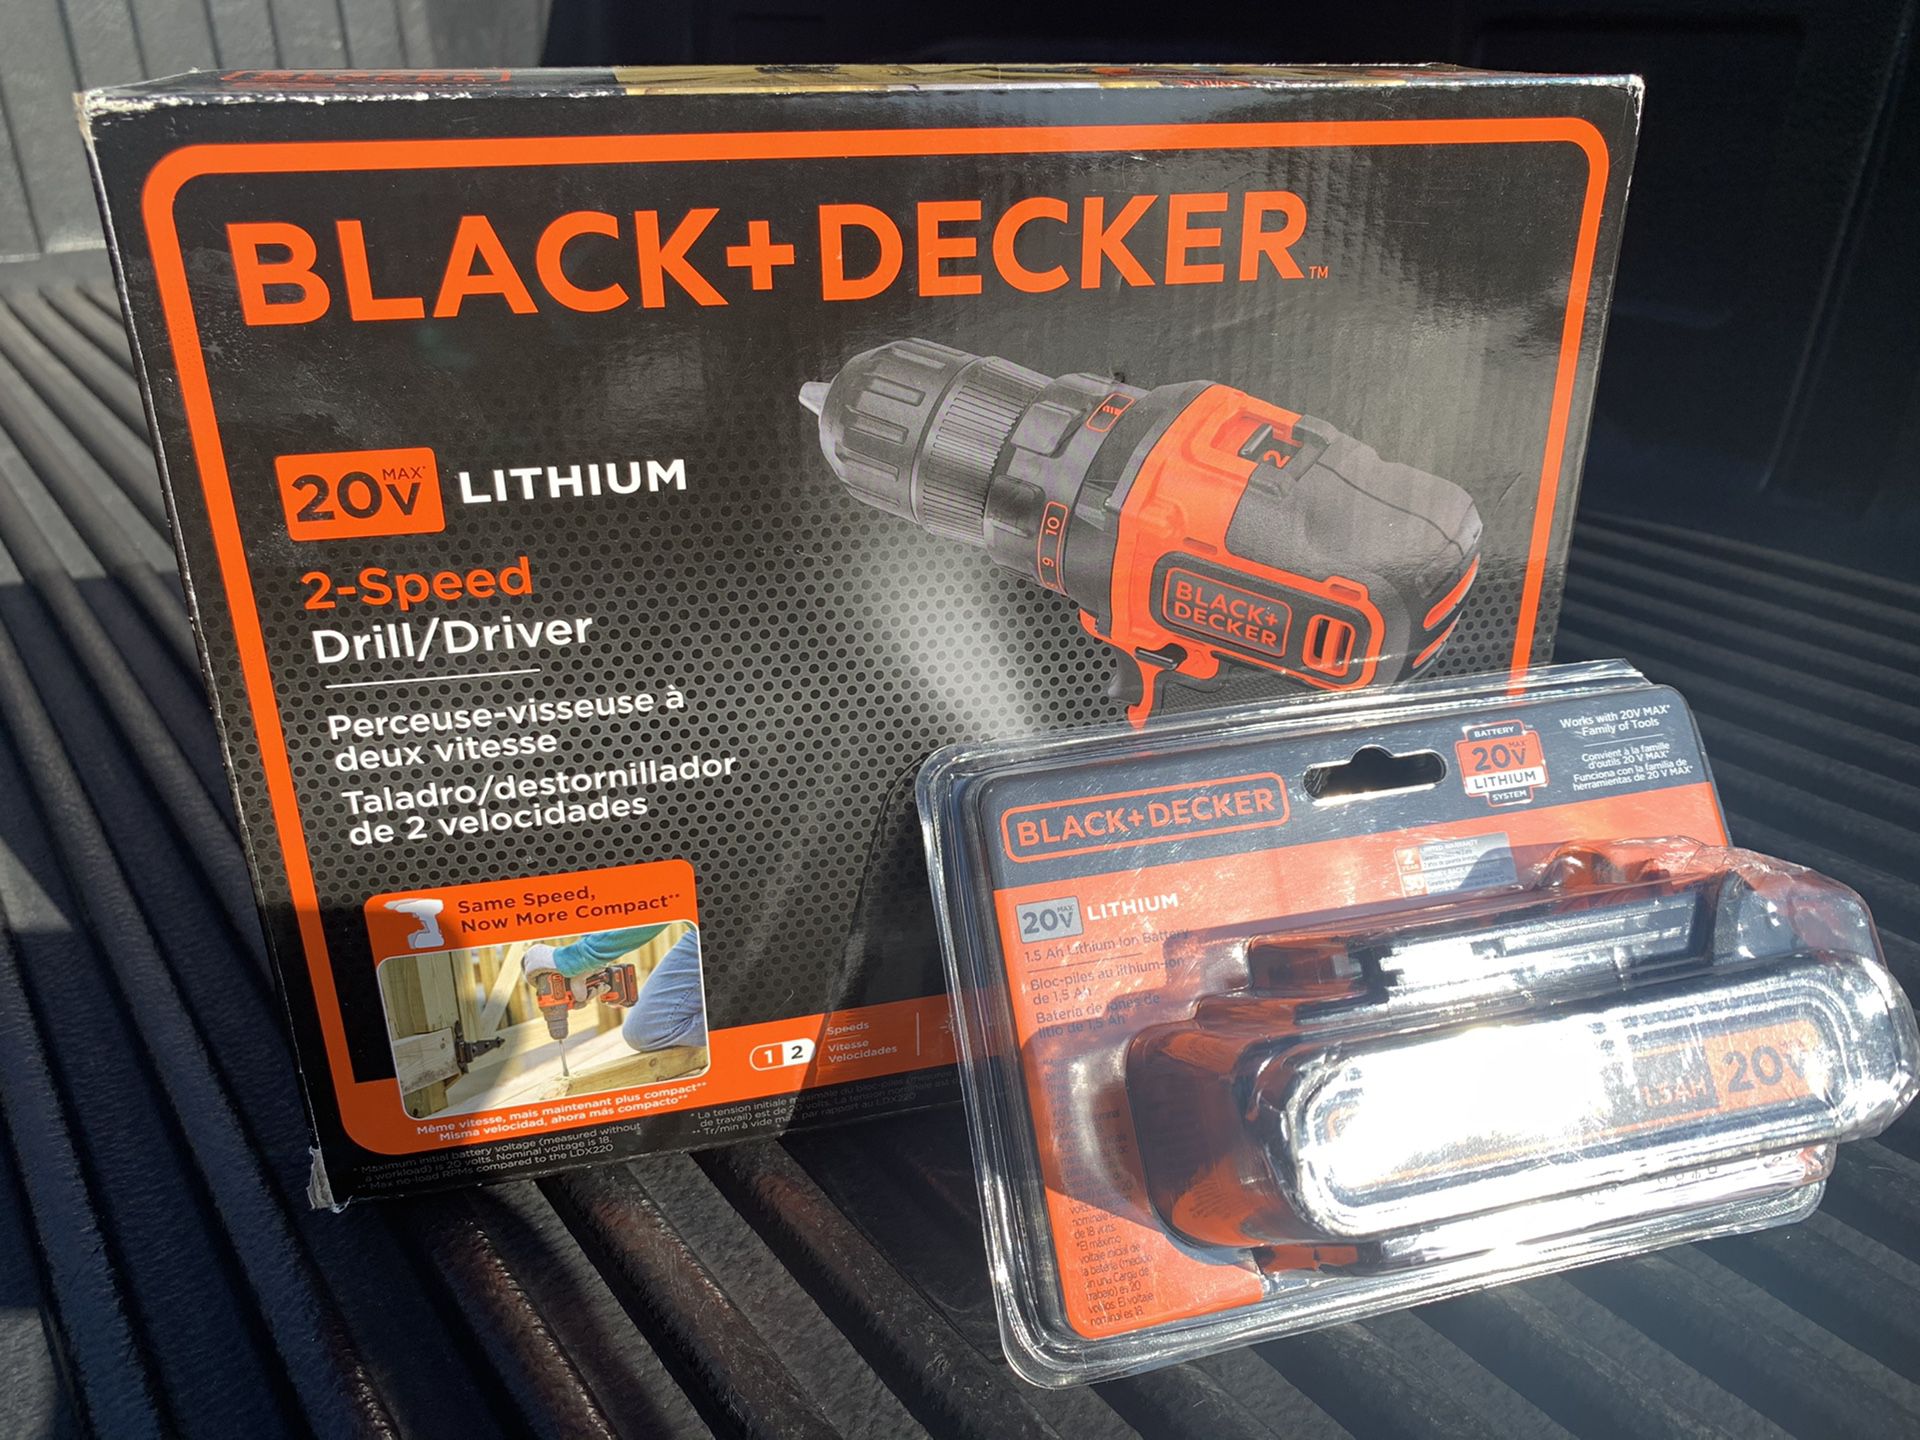 New BLACK+DECKER LDX220C 20V MAX 2-Speed Cordless Drill Driver (Includes Battery and Charger)